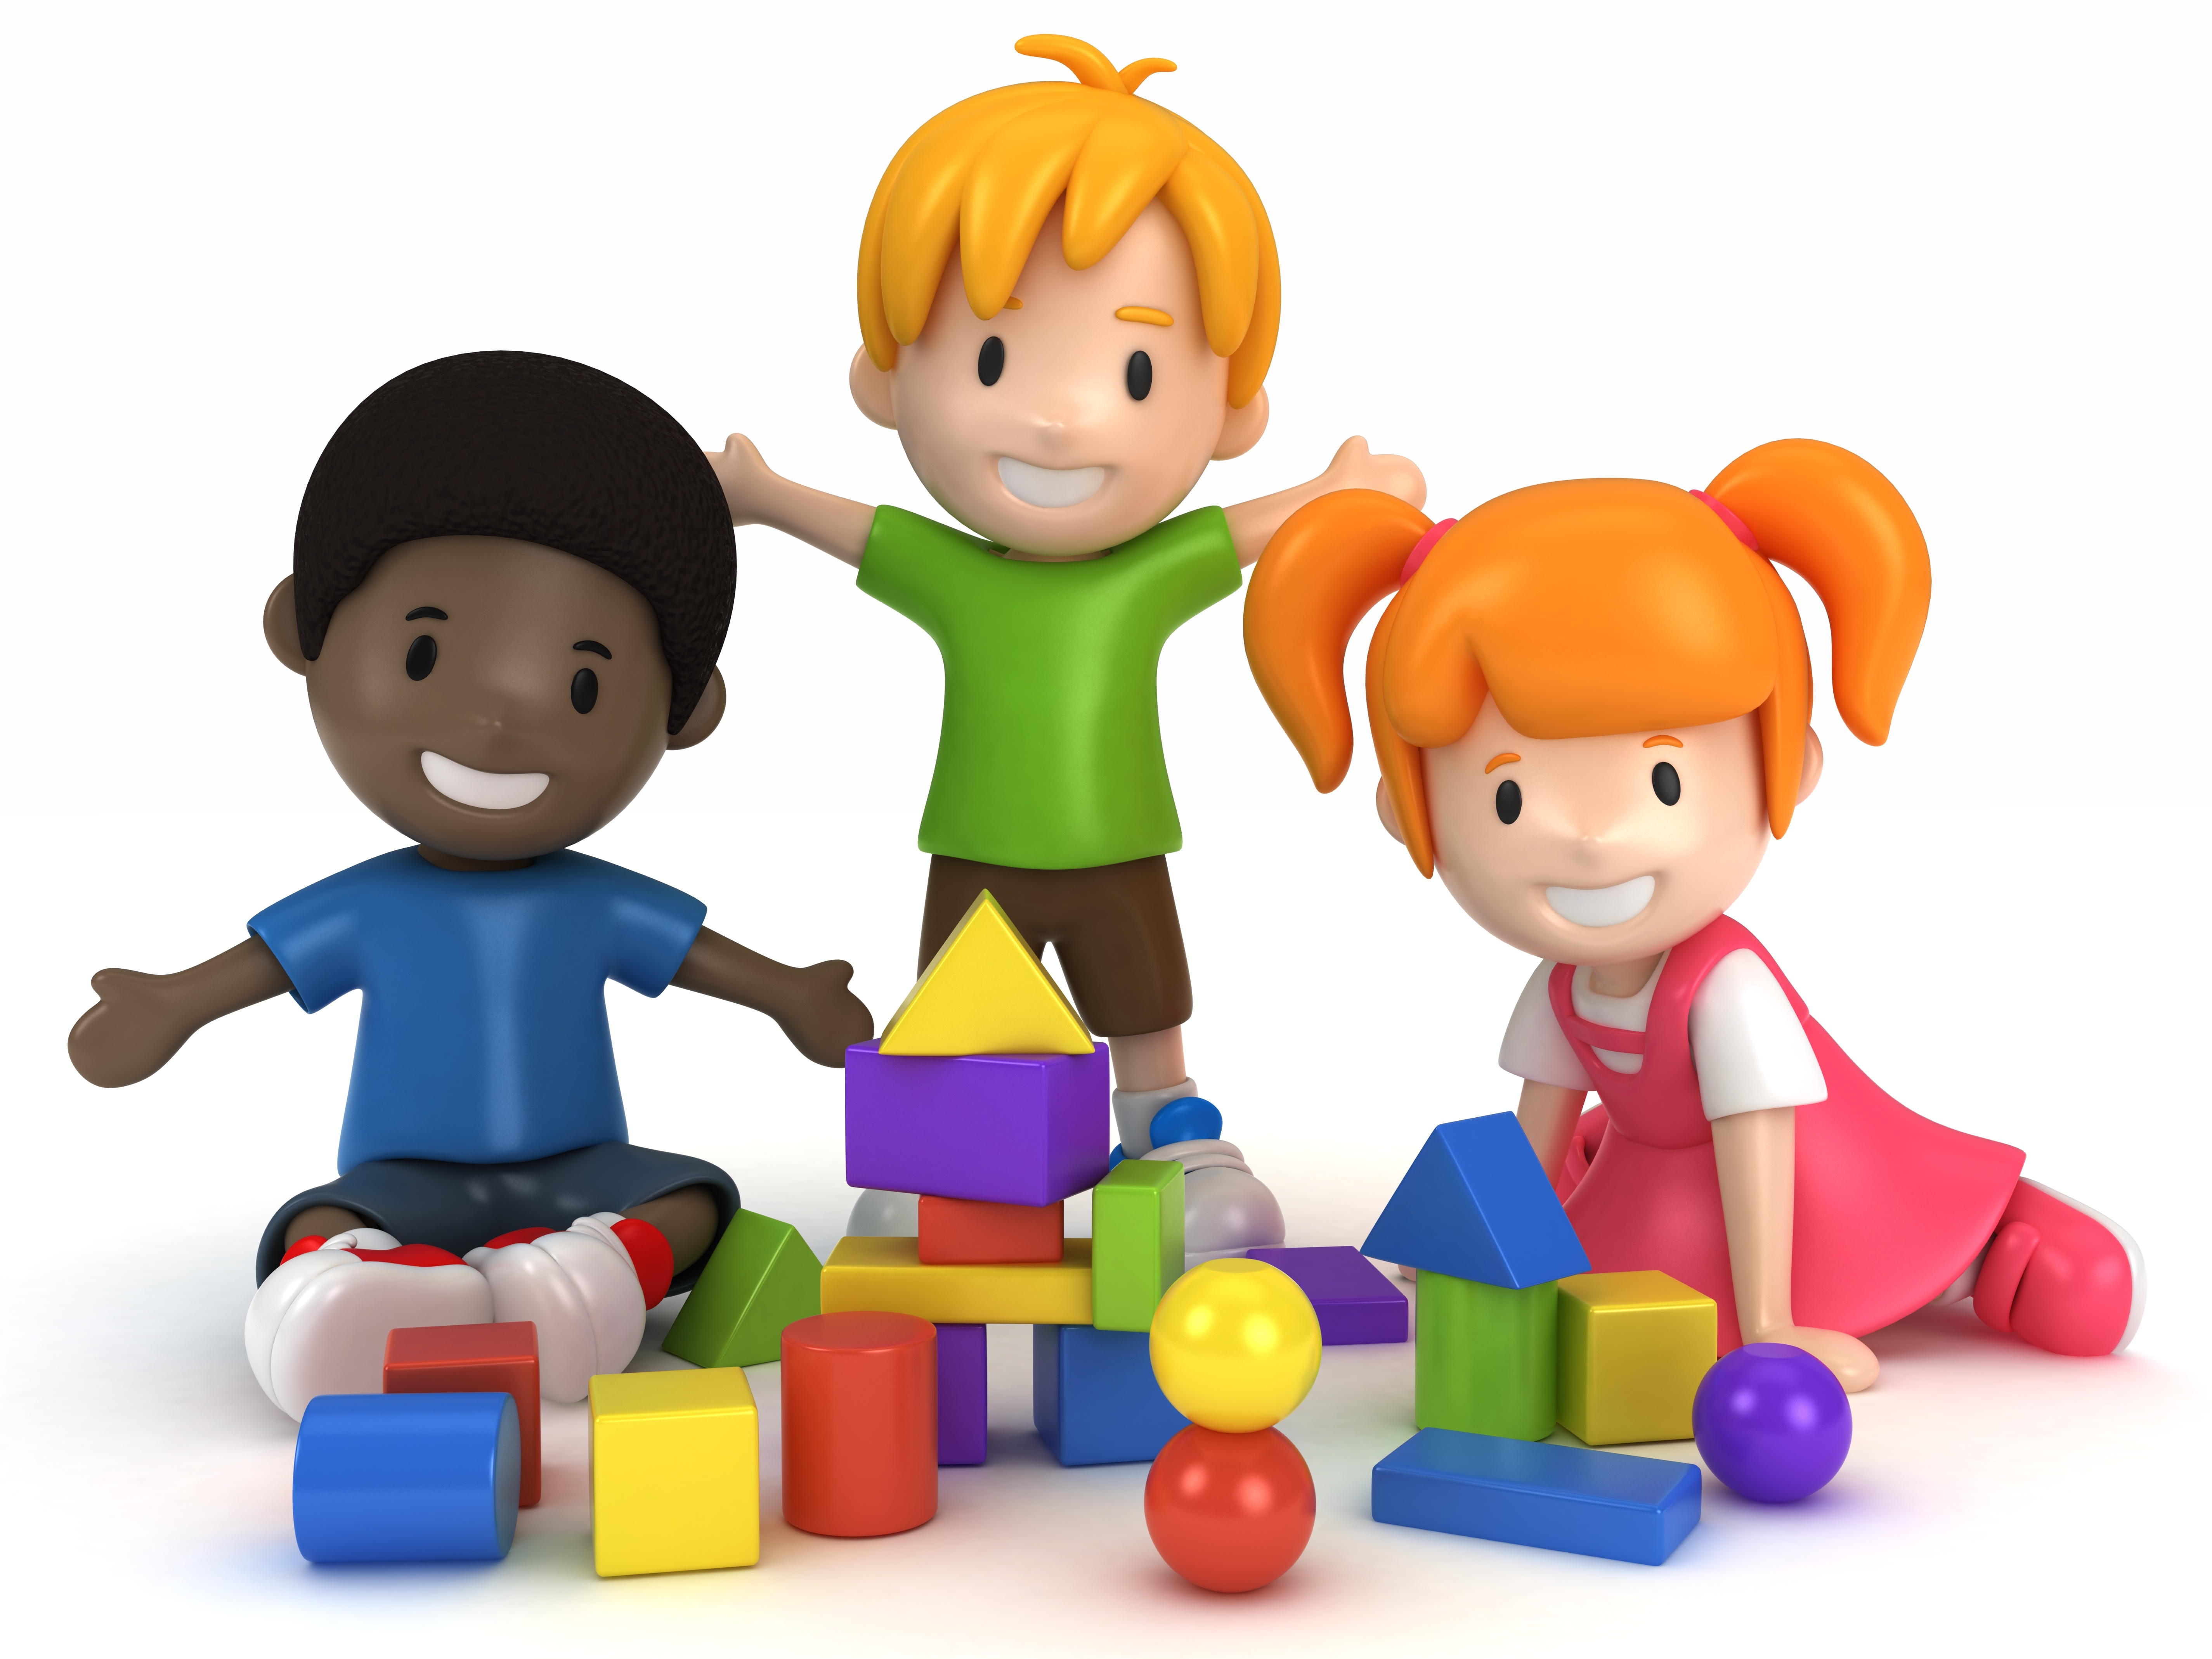 Free Images Kids Playing, Download Free Clip Art, Free Clip